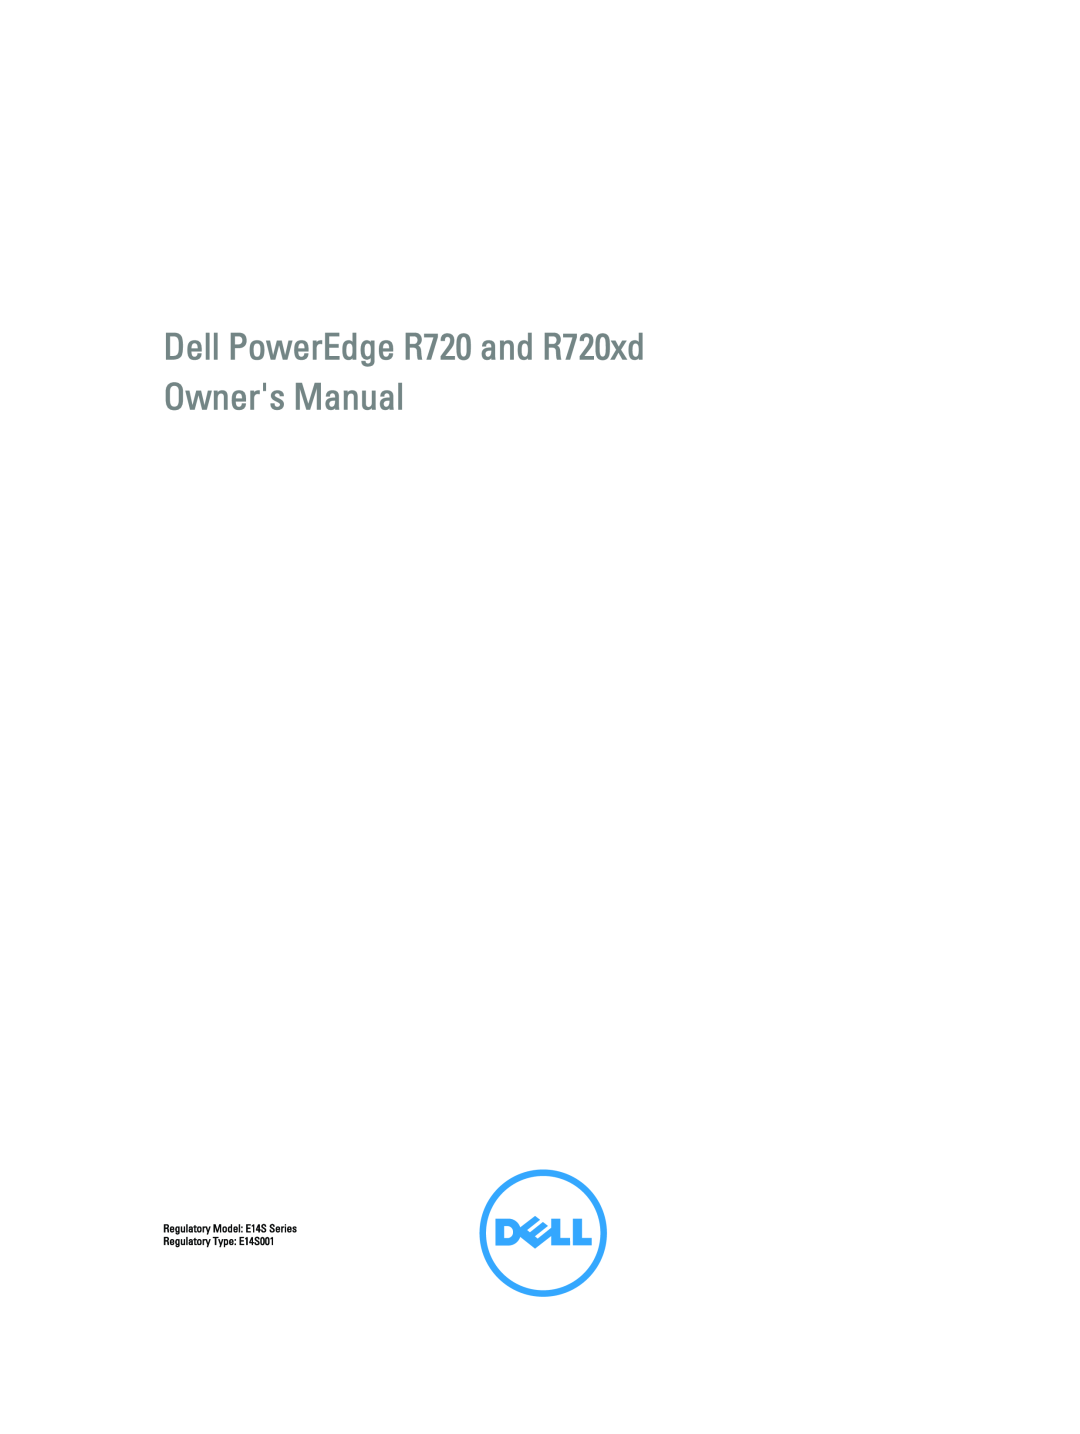 Dell R720XD owner manual Dell PowerEdge R720 and R720xd Owners Manual, Regulatory Model E14S Series 